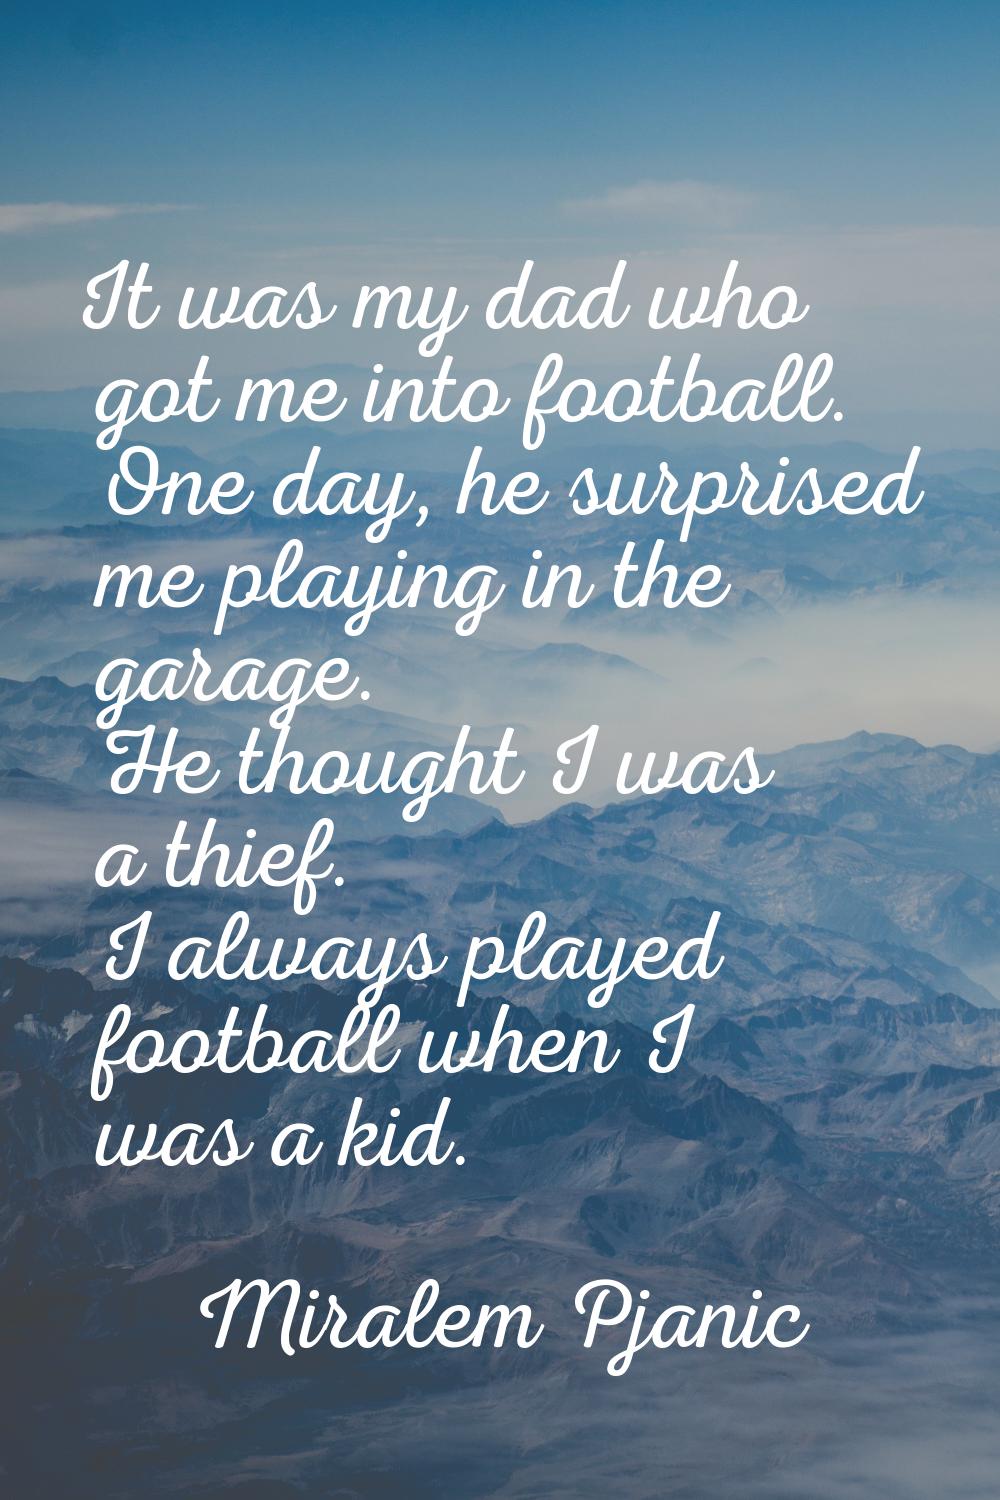 It was my dad who got me into football. One day, he surprised me playing in the garage. He thought 